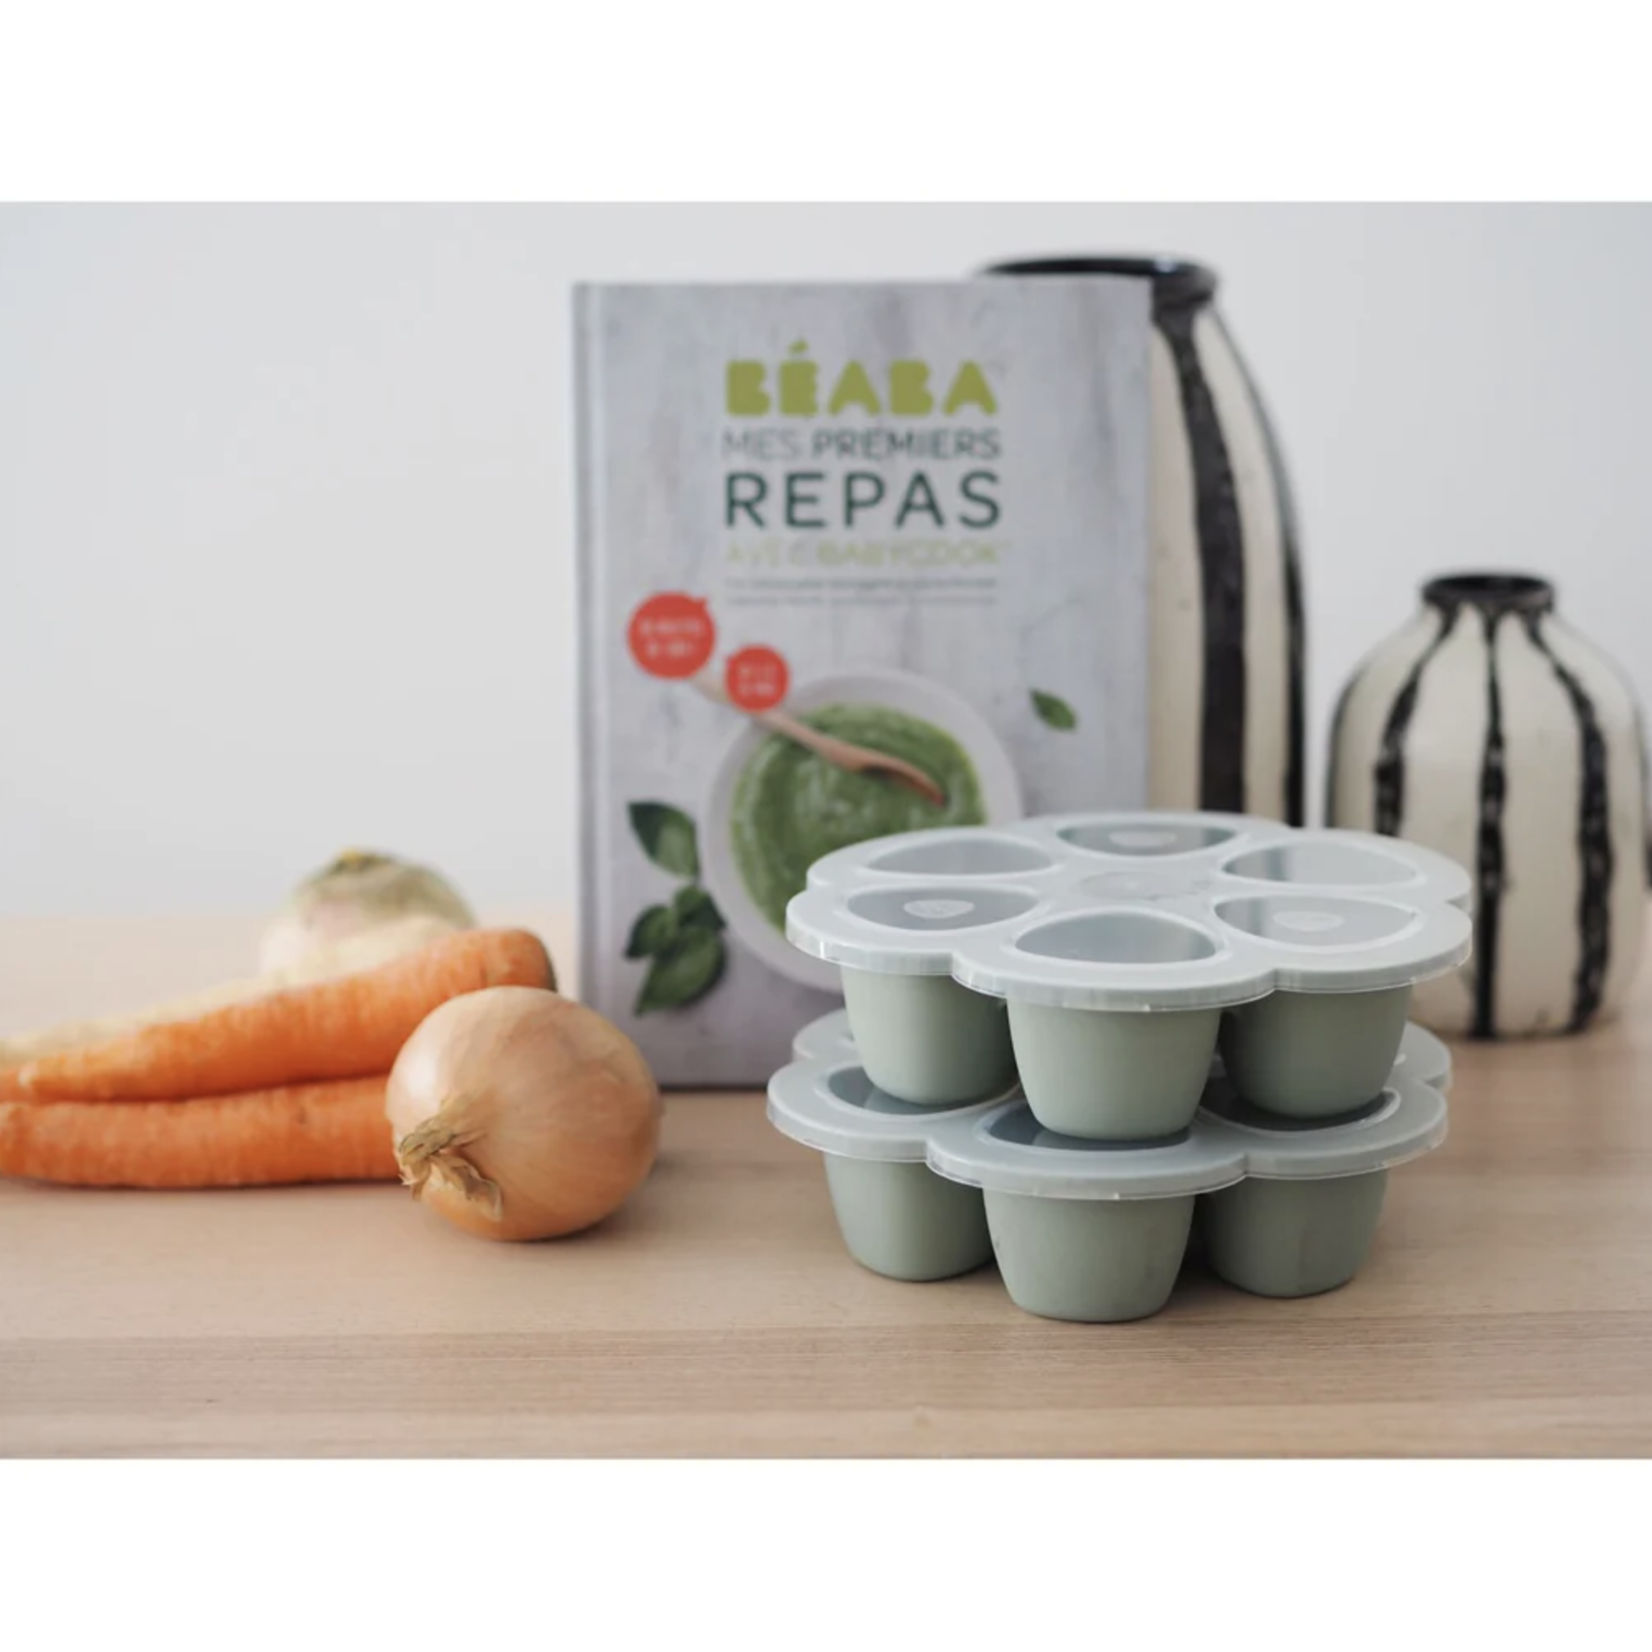 BEABA Multiportions Silicone Freezer Tray 6 X 90ml - Sage Green